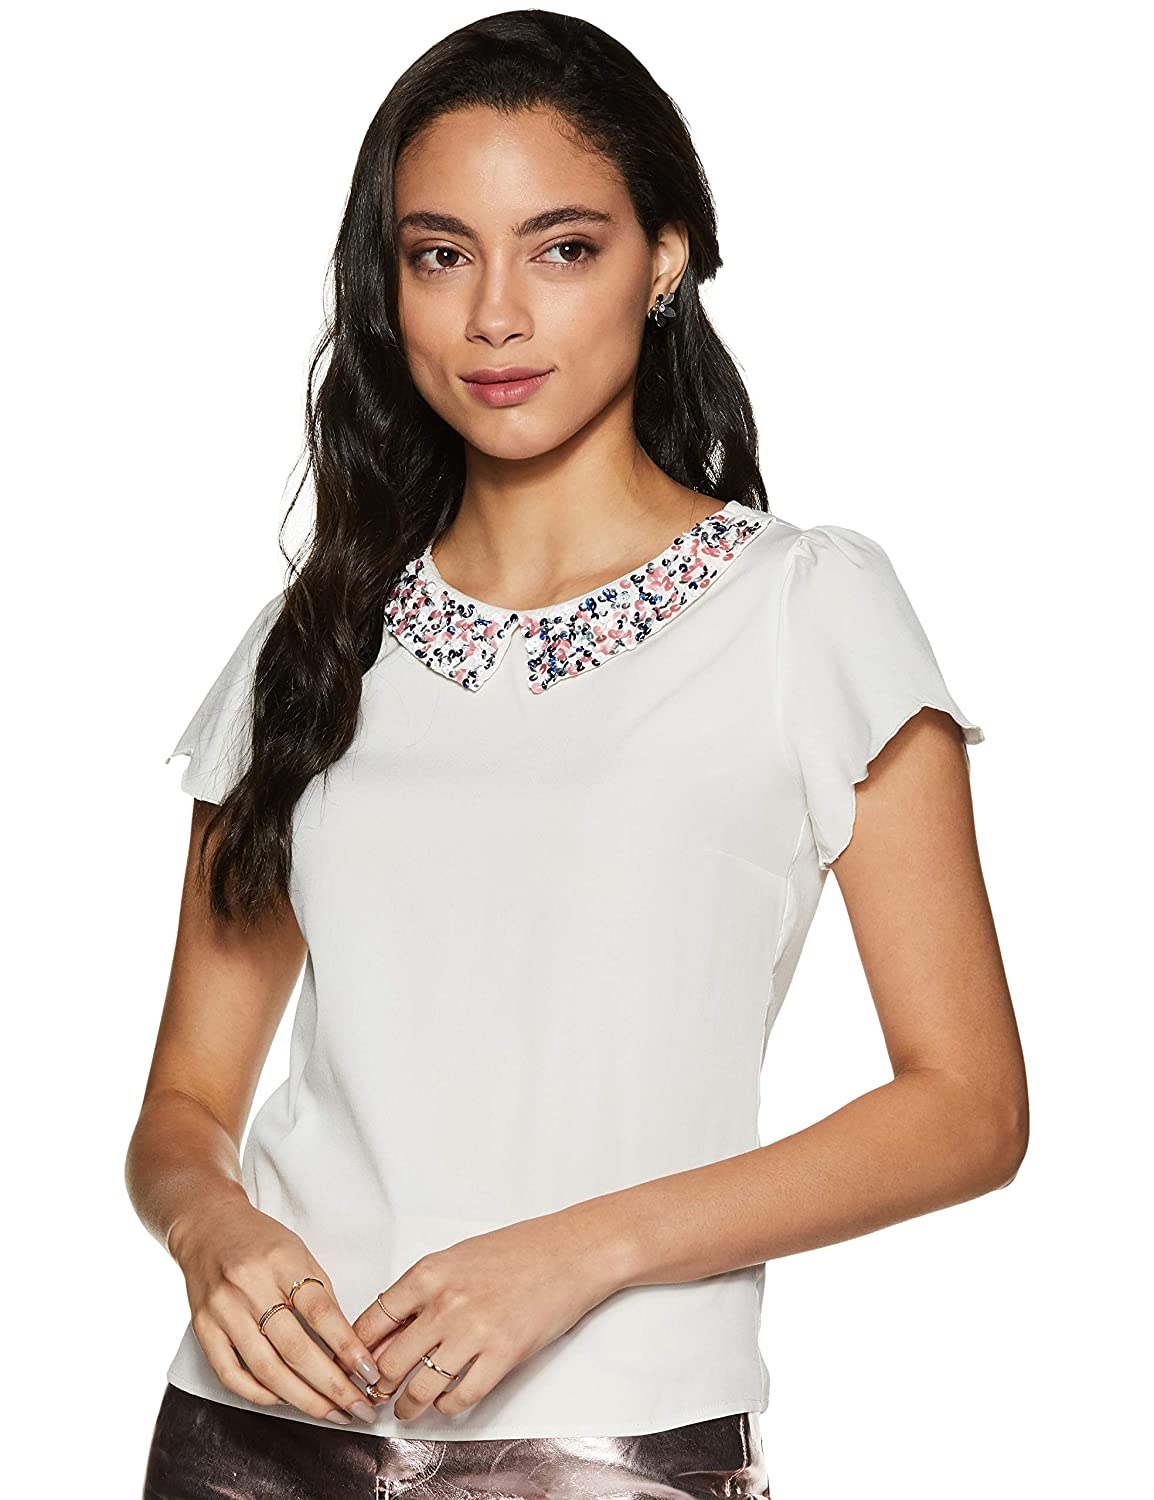 LY2 hand embellished design Top - White